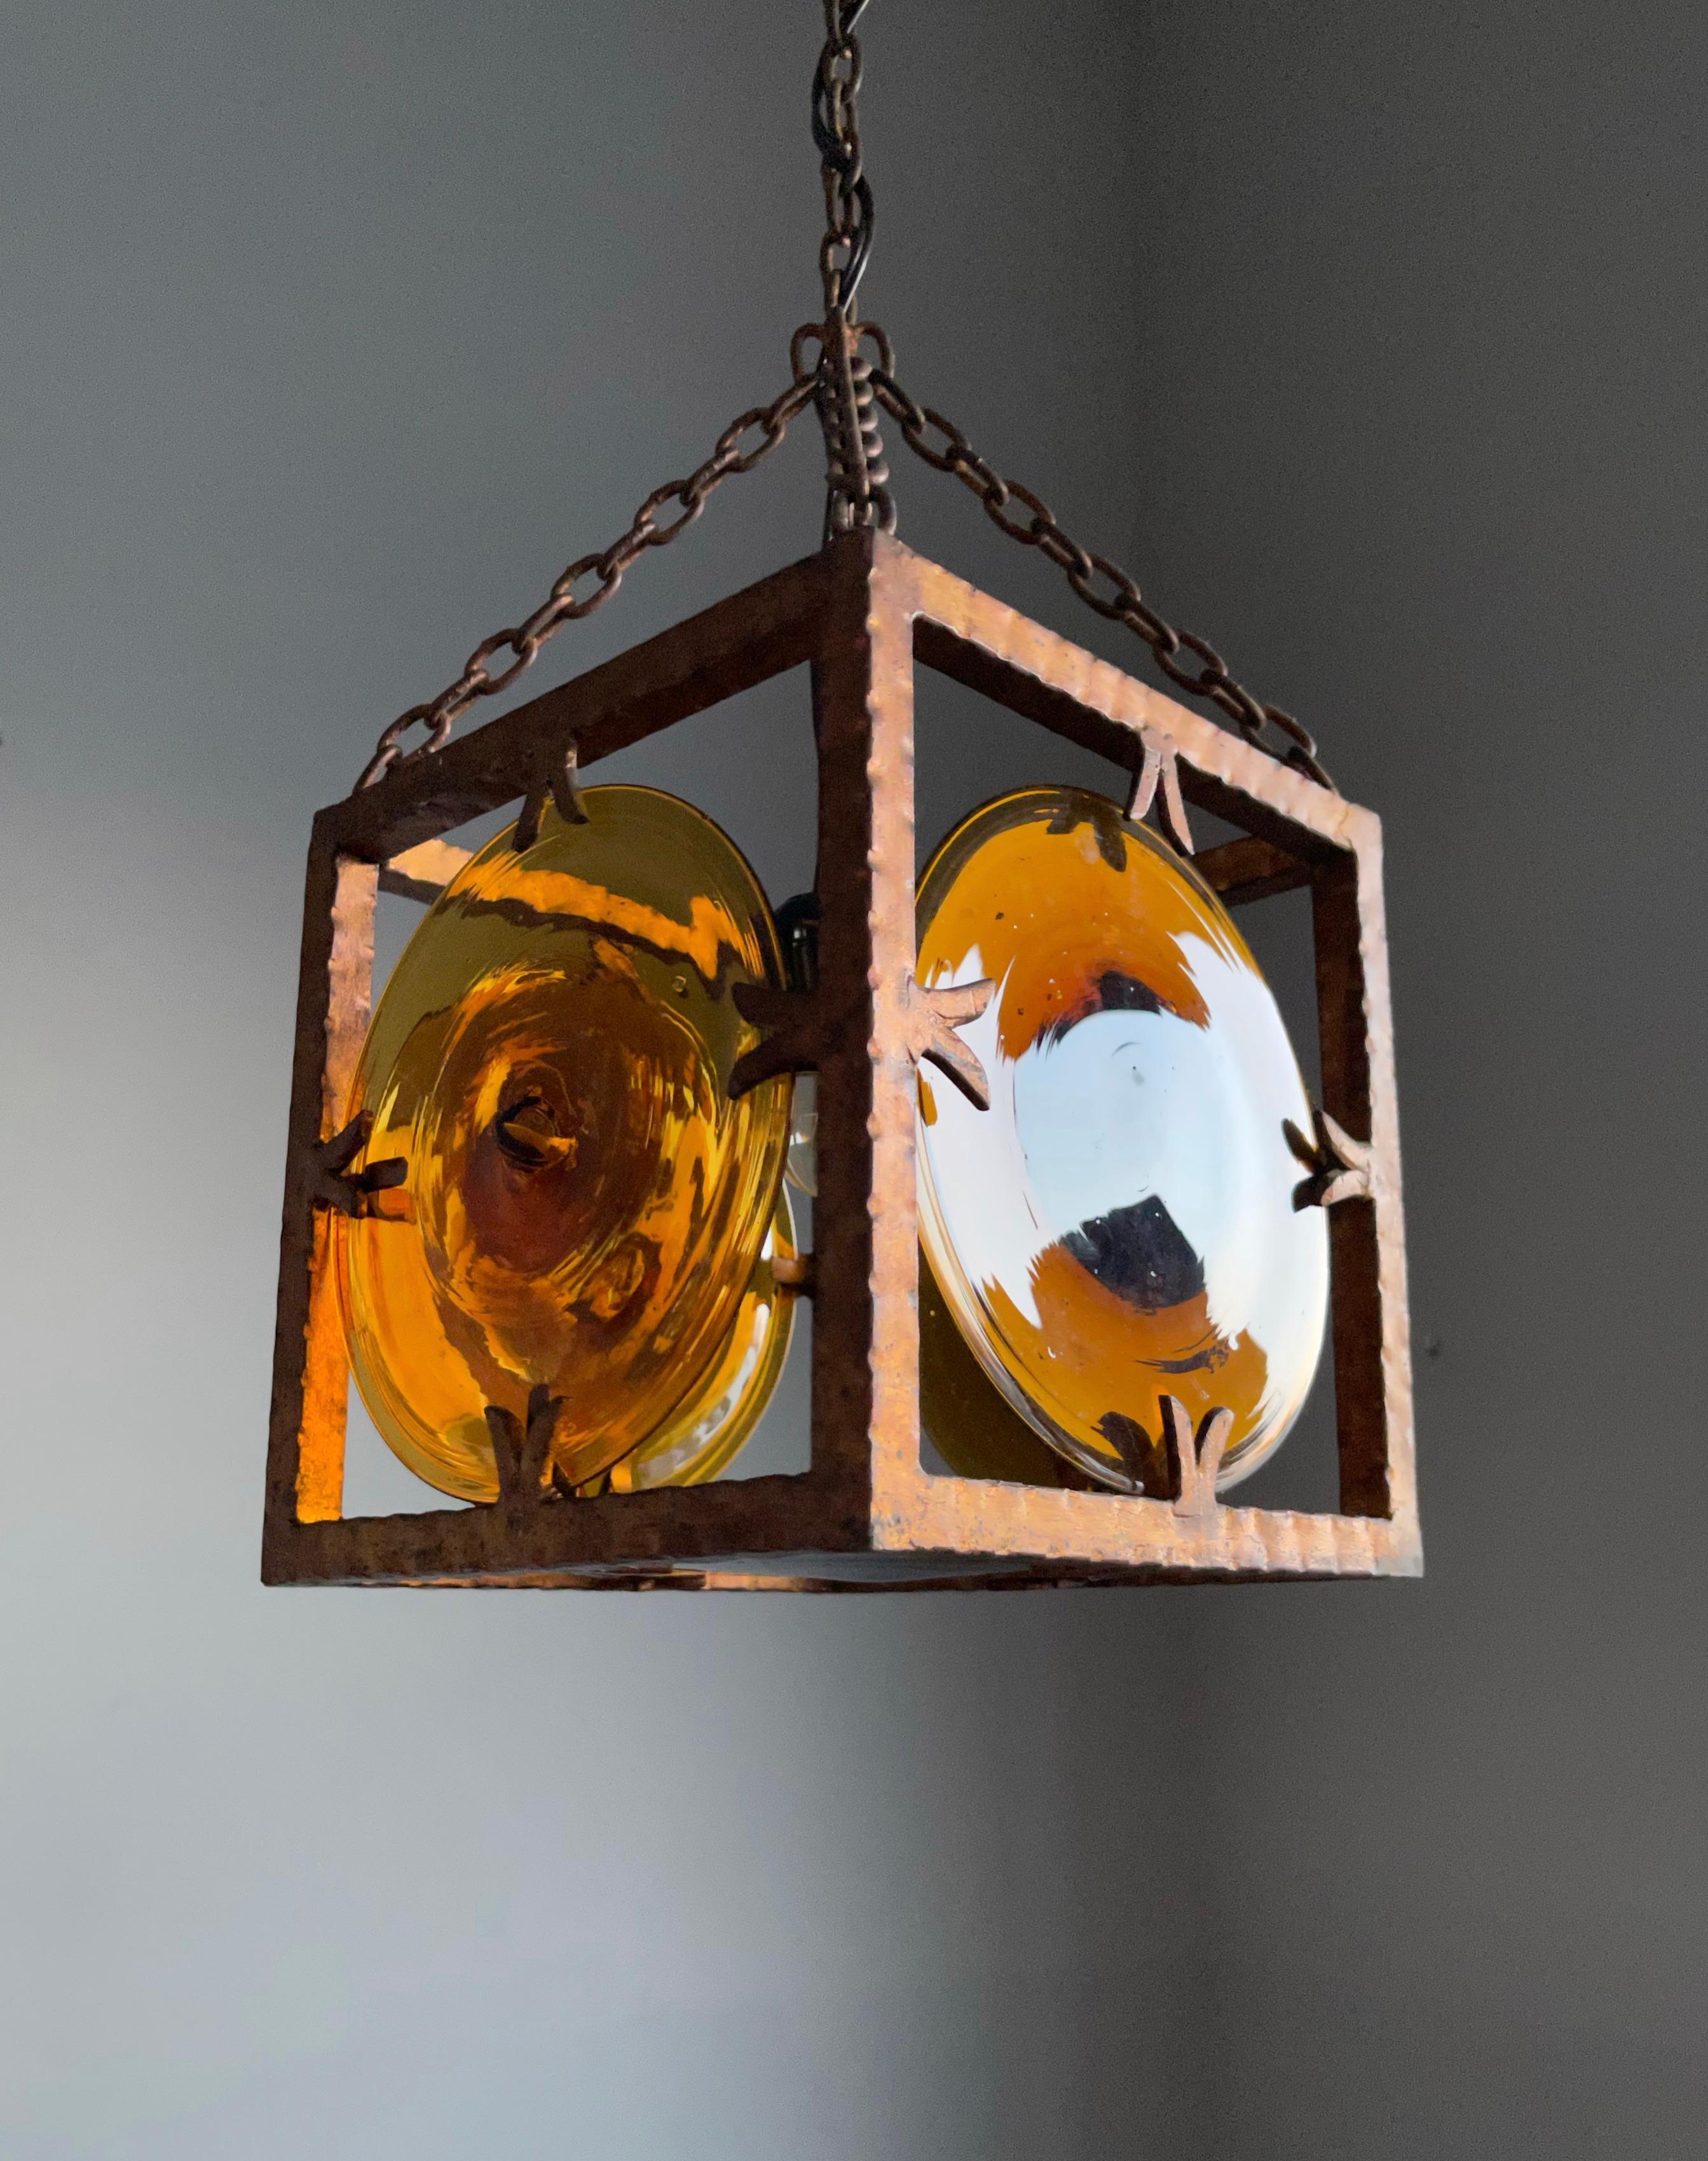 Rare design pendant with large, mouth blown art glass discs in gilt wrought iron frame.

If you are looking for a striking and extraordinary light fixture to grace your midcentury living or work space then this, Italian work of lighting art could be